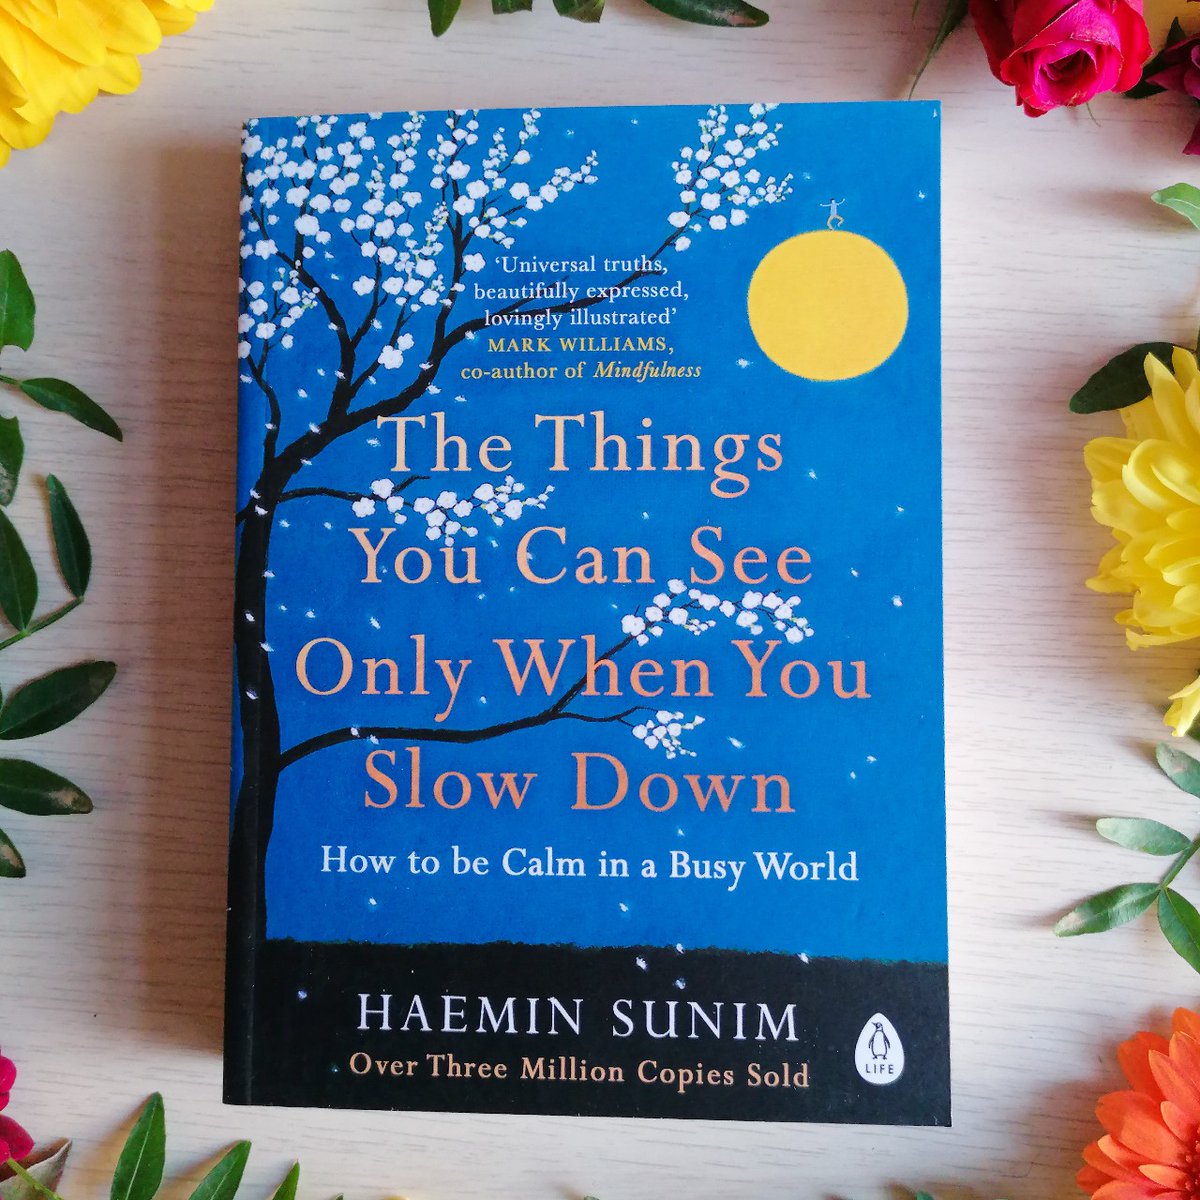 Diving into 'The Things You Can See Only When You Slow Down' by Haemin Sunim has been a serene escape from the daily hustle. 🌼 In the latest edition of #WorkingOutLoud I’m sharing my top 10+1 quotes from this book and I want love to know - which one speaks to you? Let's